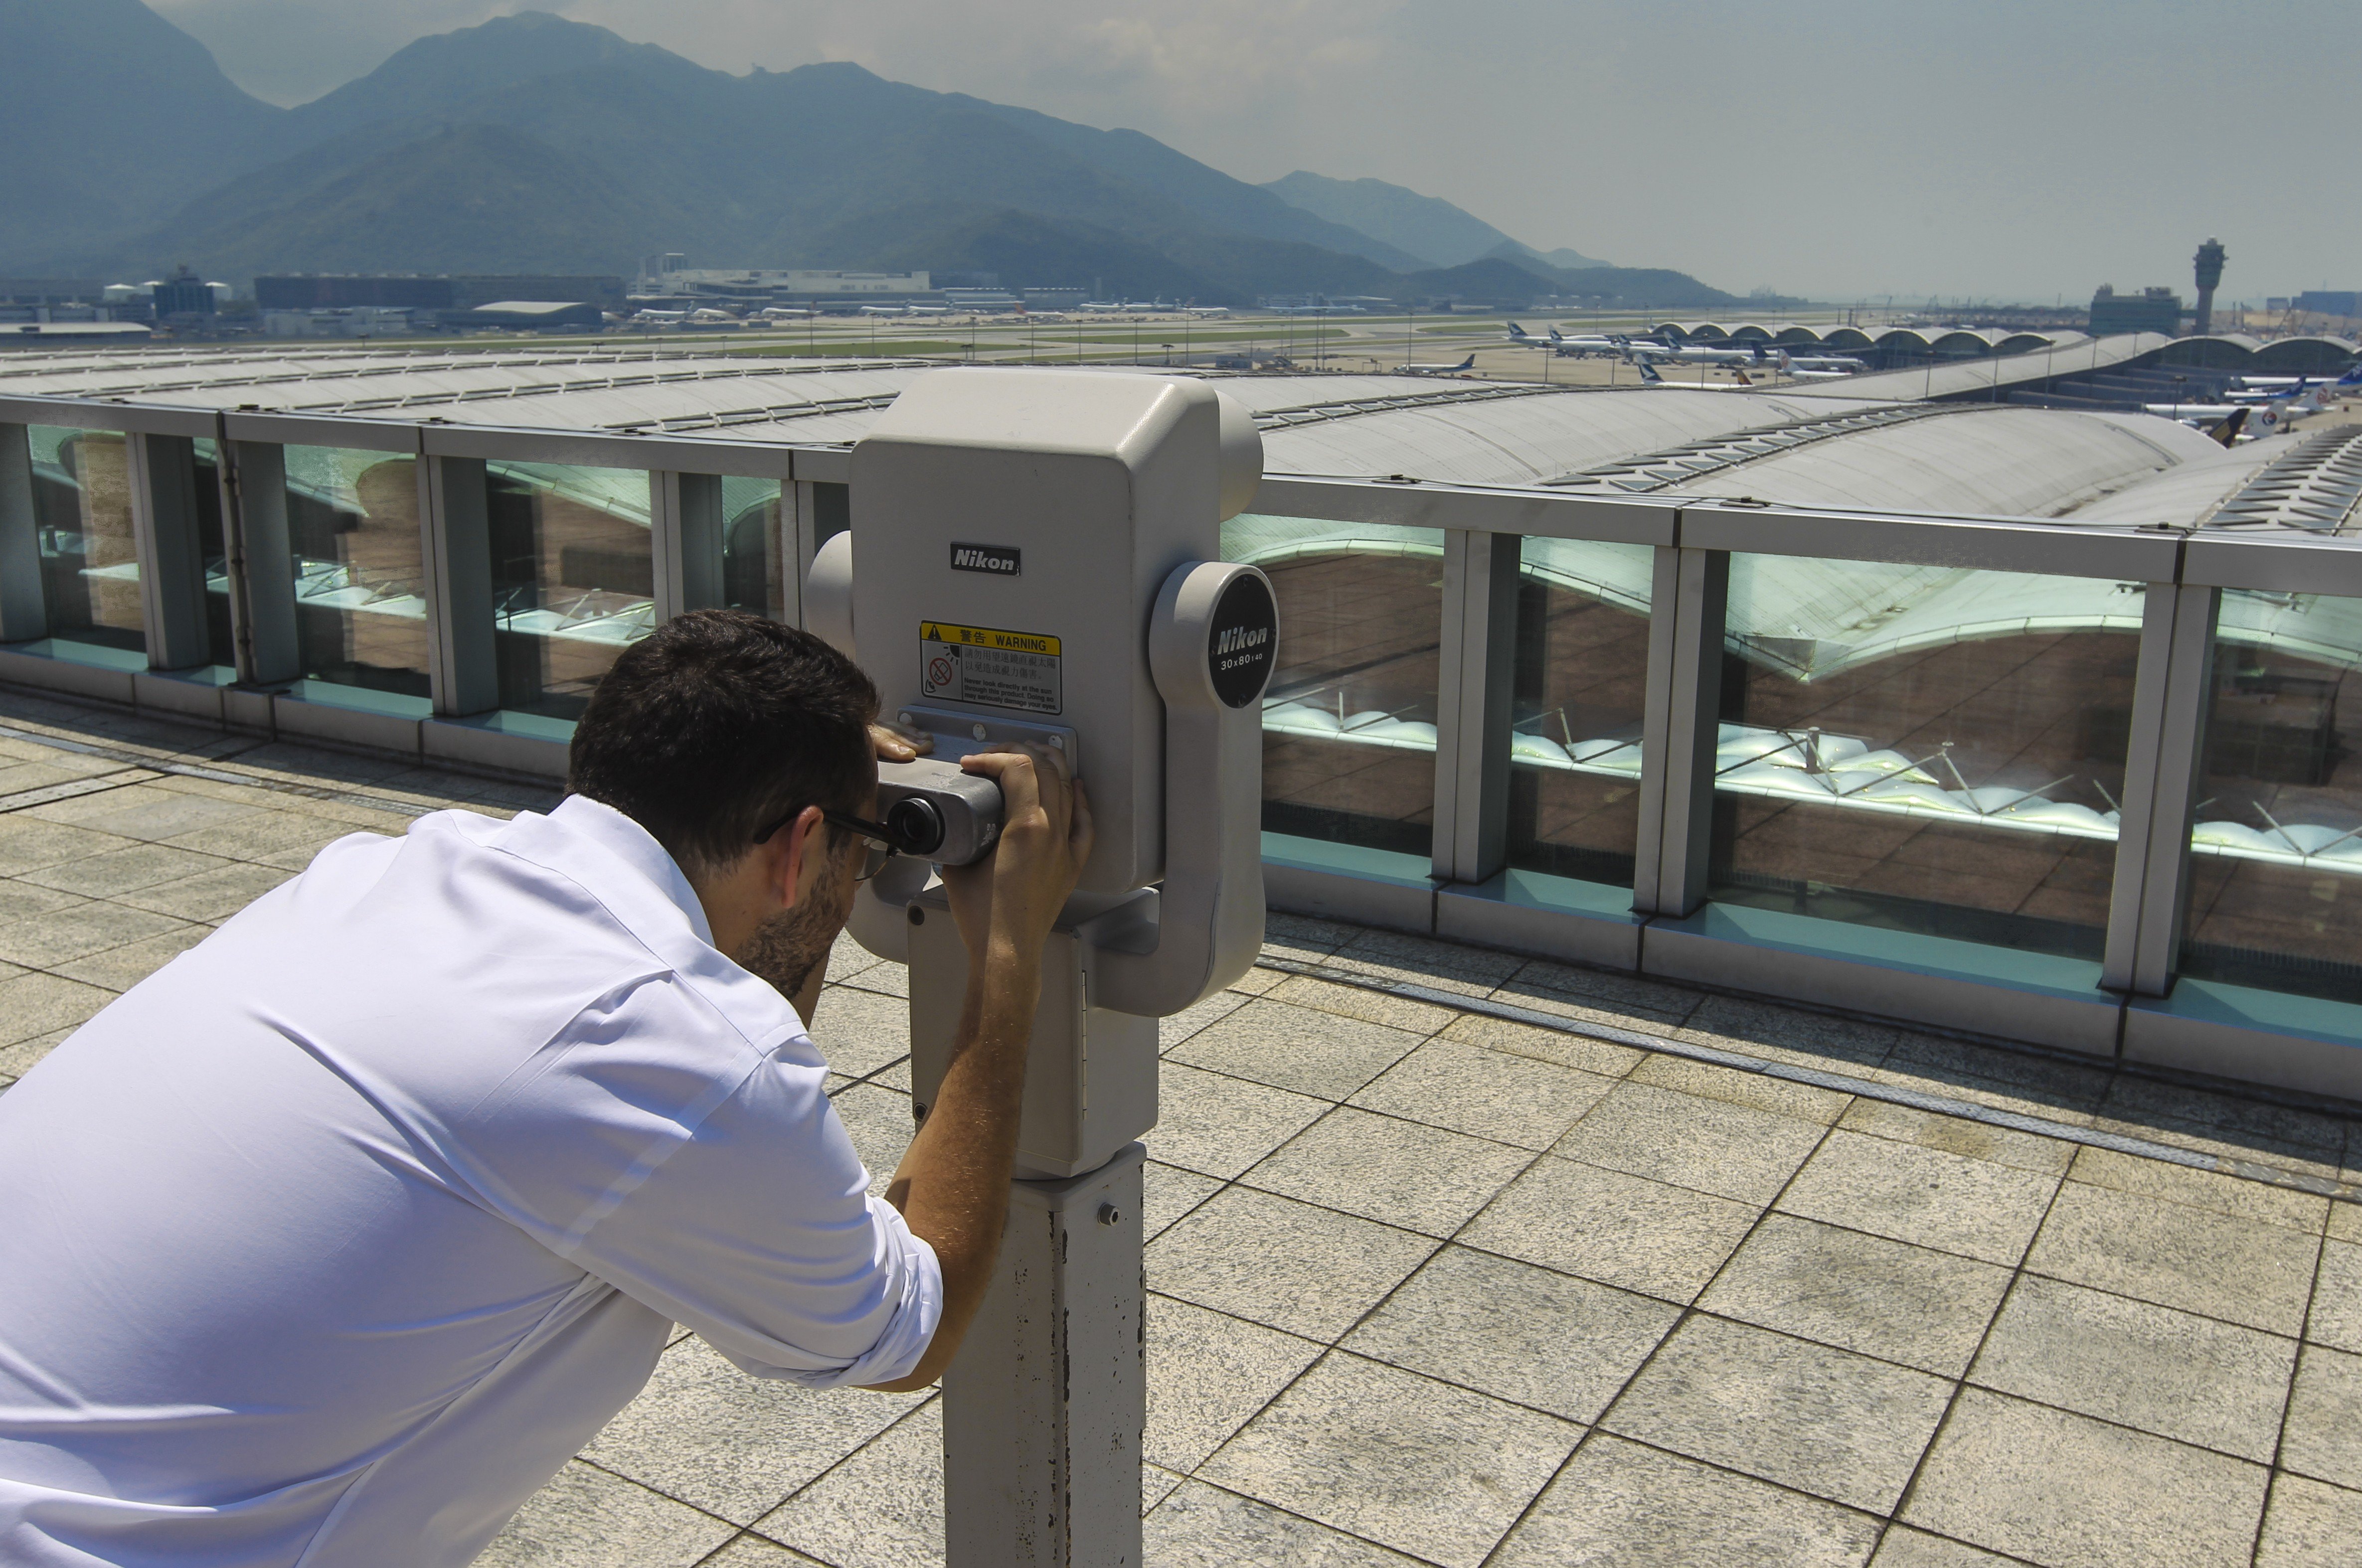 Hong Kong airport’s Aviation Discovery Centre includes an outdoor sky deck where you can watch the action on the runway with binoculars. Photo: Edward Wong